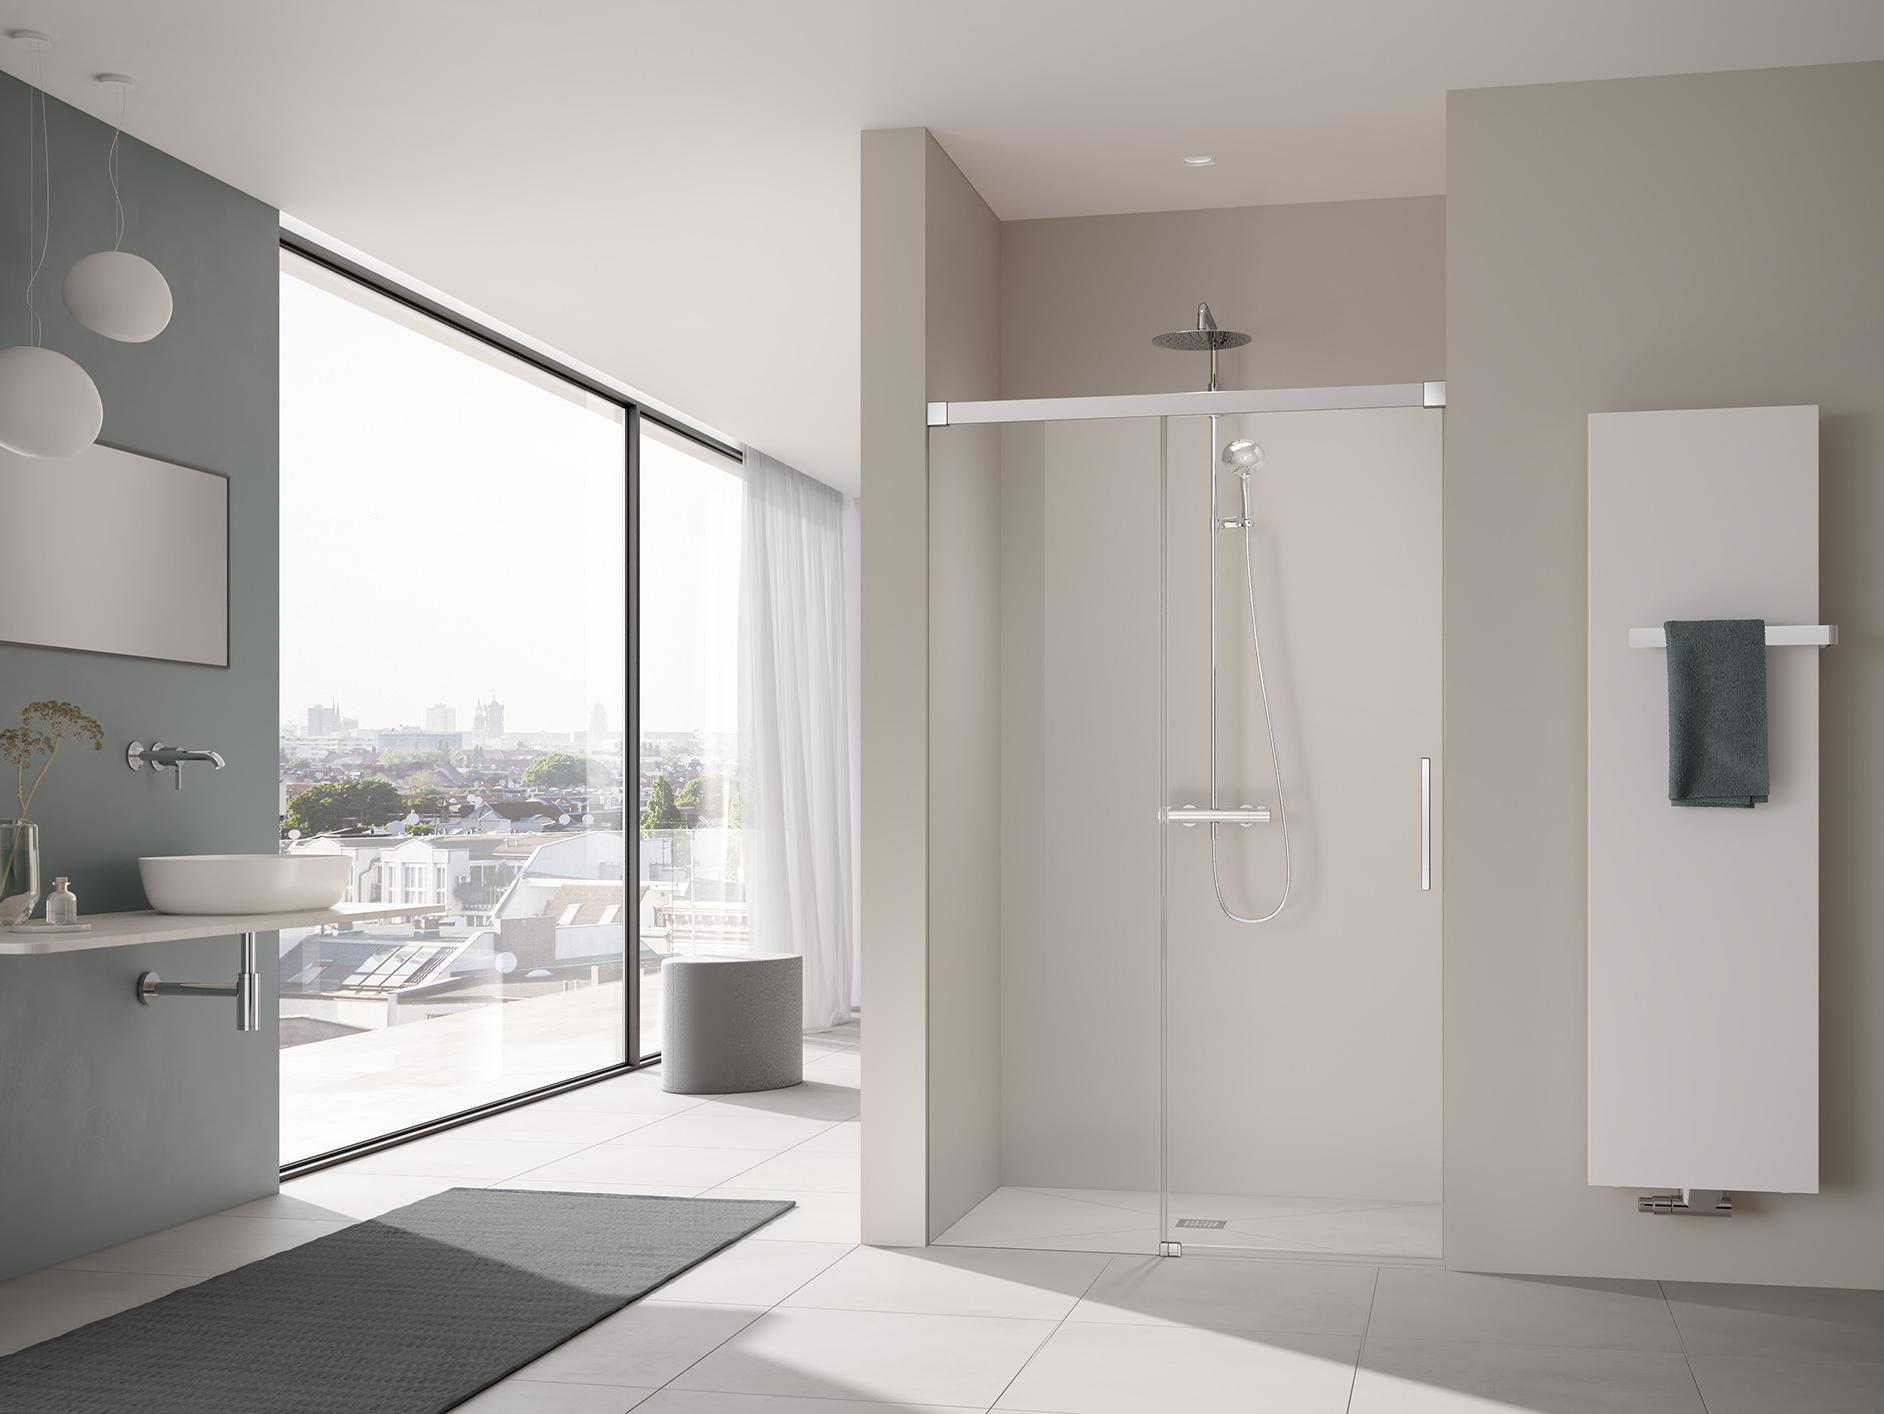 Kermi profile shower enclosure, NICA off-floor two-part sliding door with fixed panel without wall profile